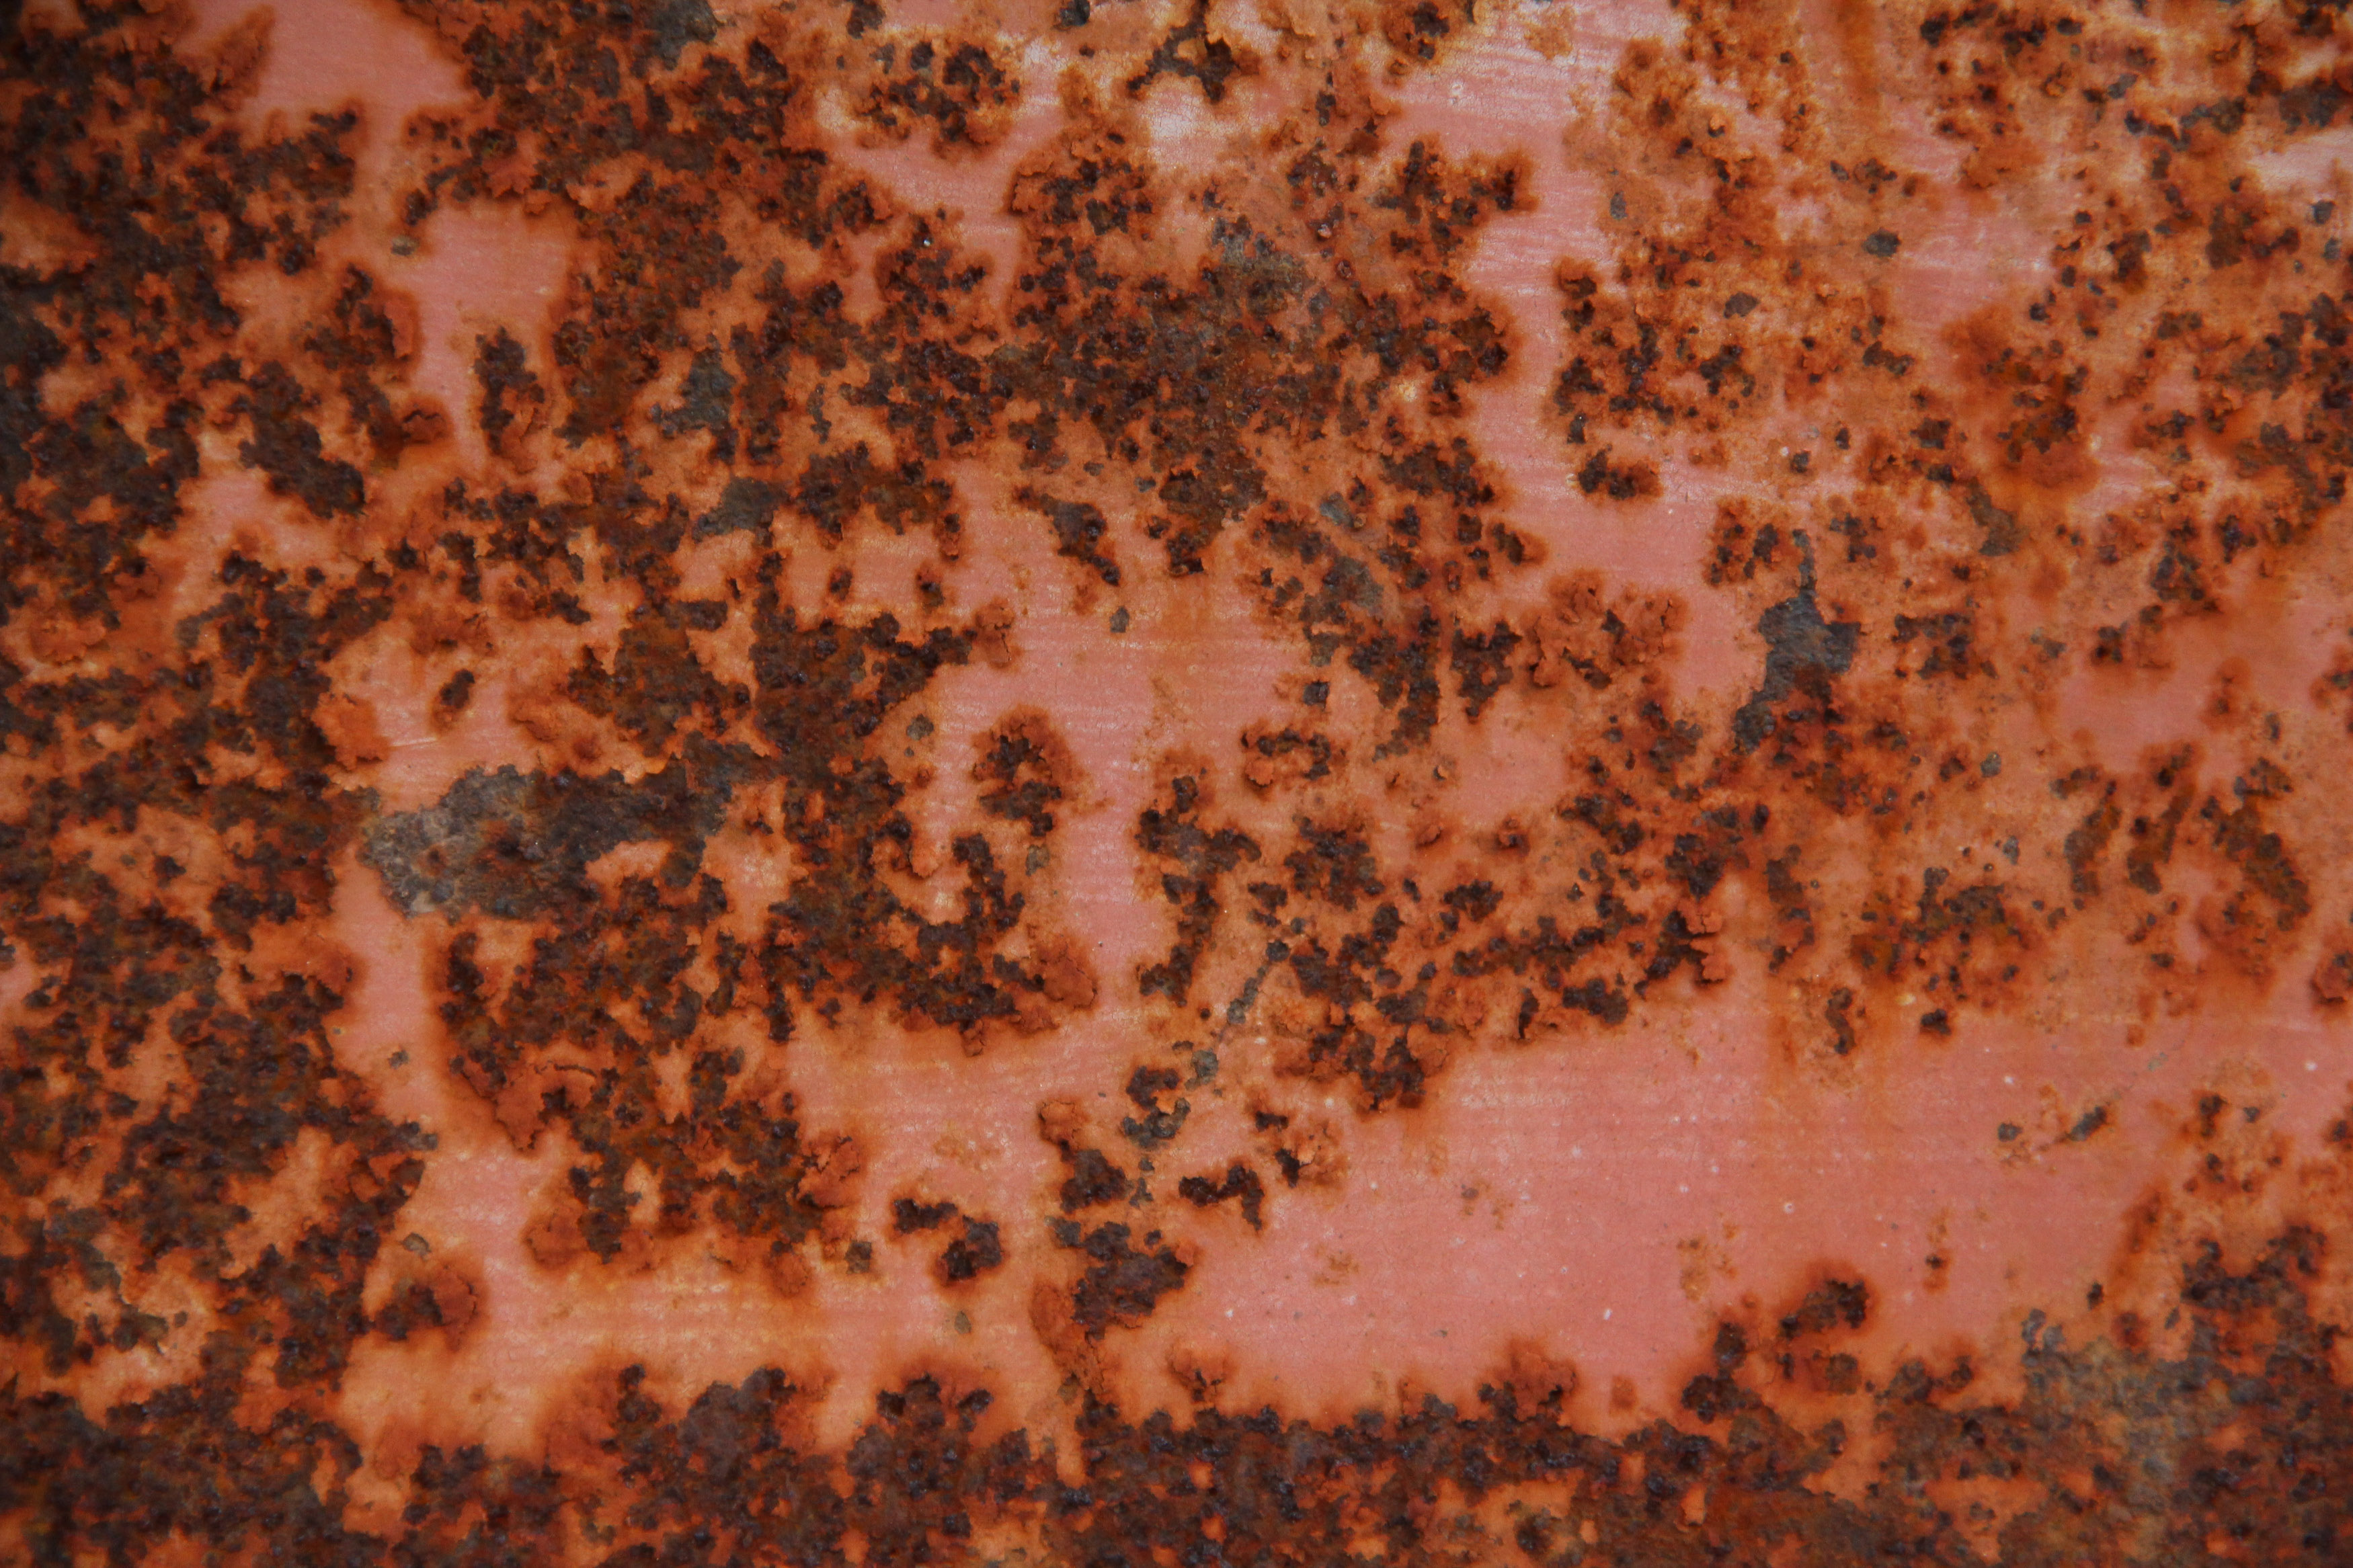 grunge texture spotted rust peeling metal paint surface photo ...